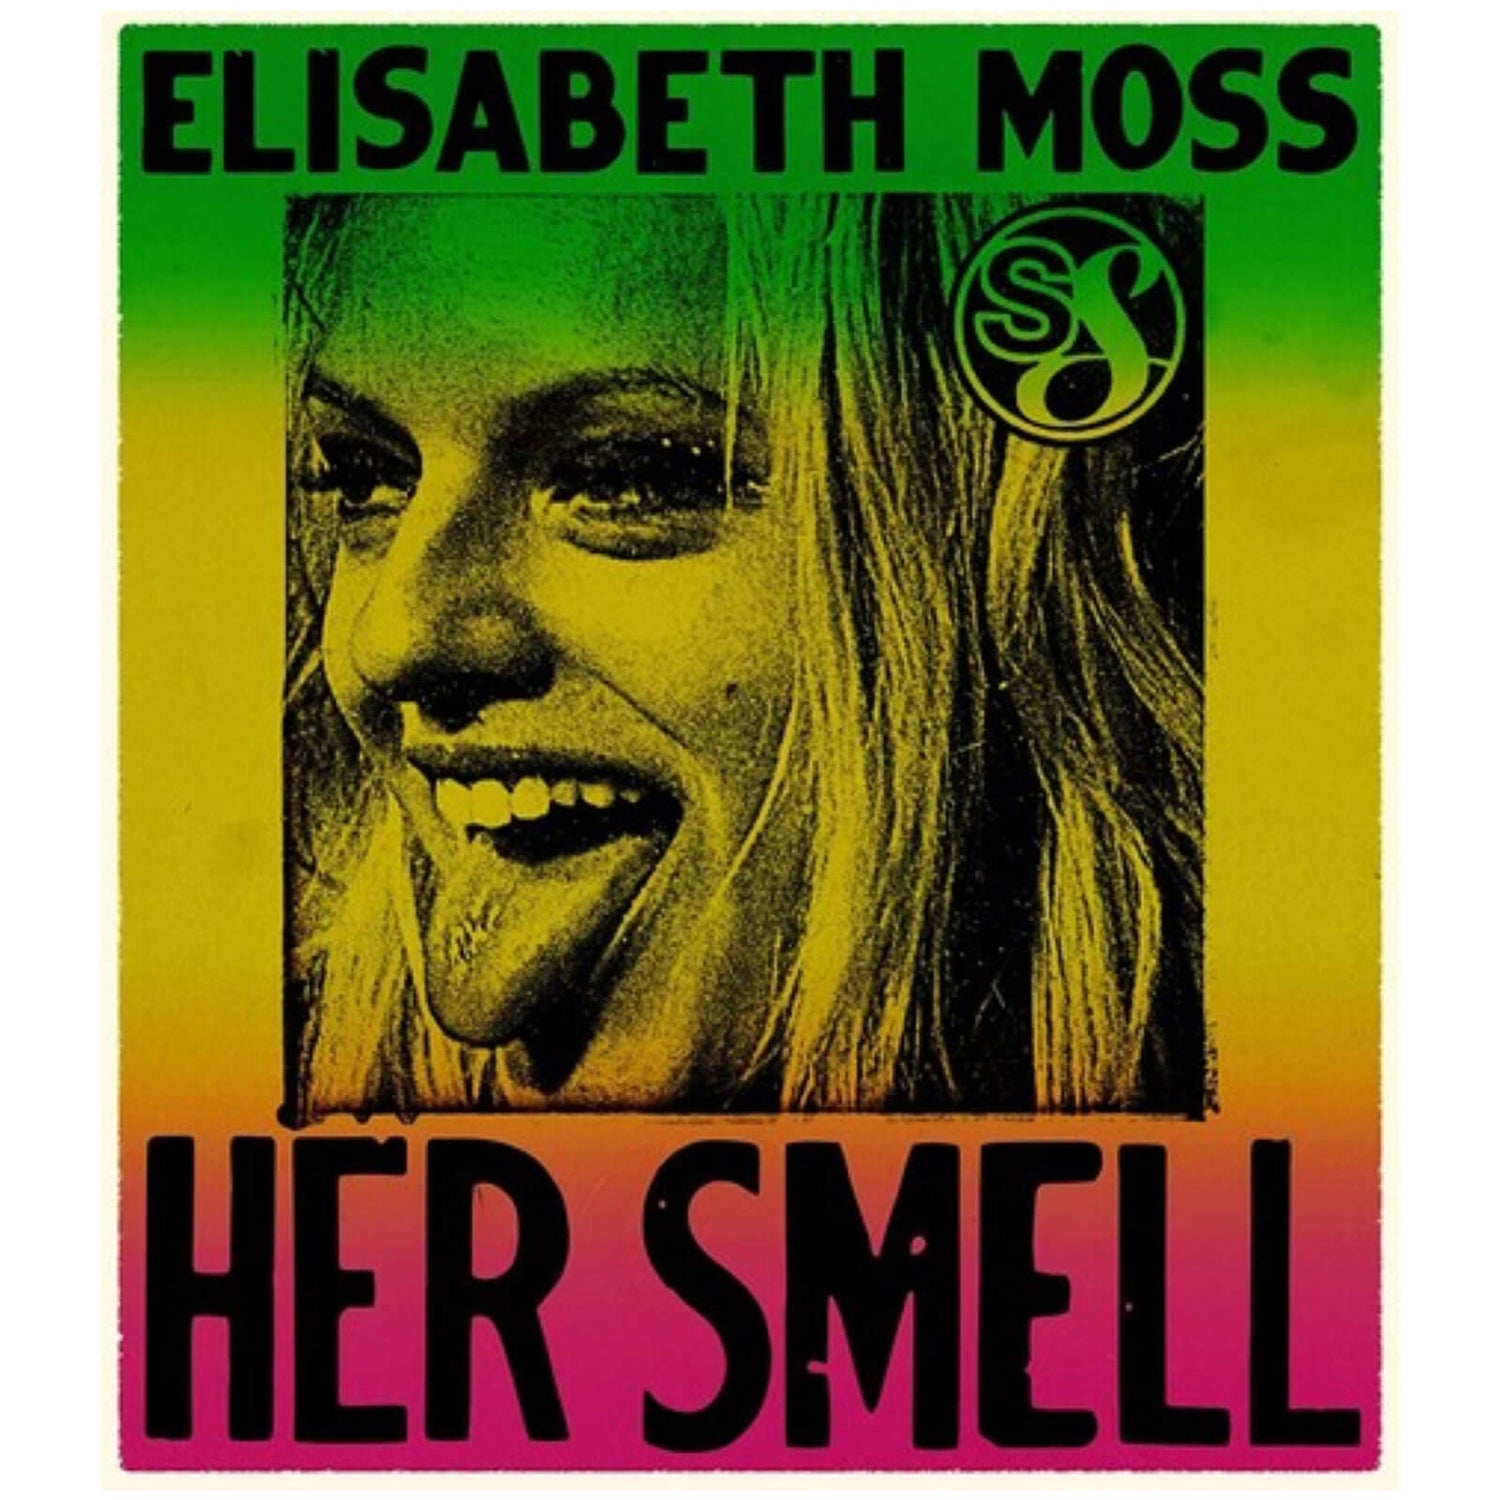 Her Smell (US Import)